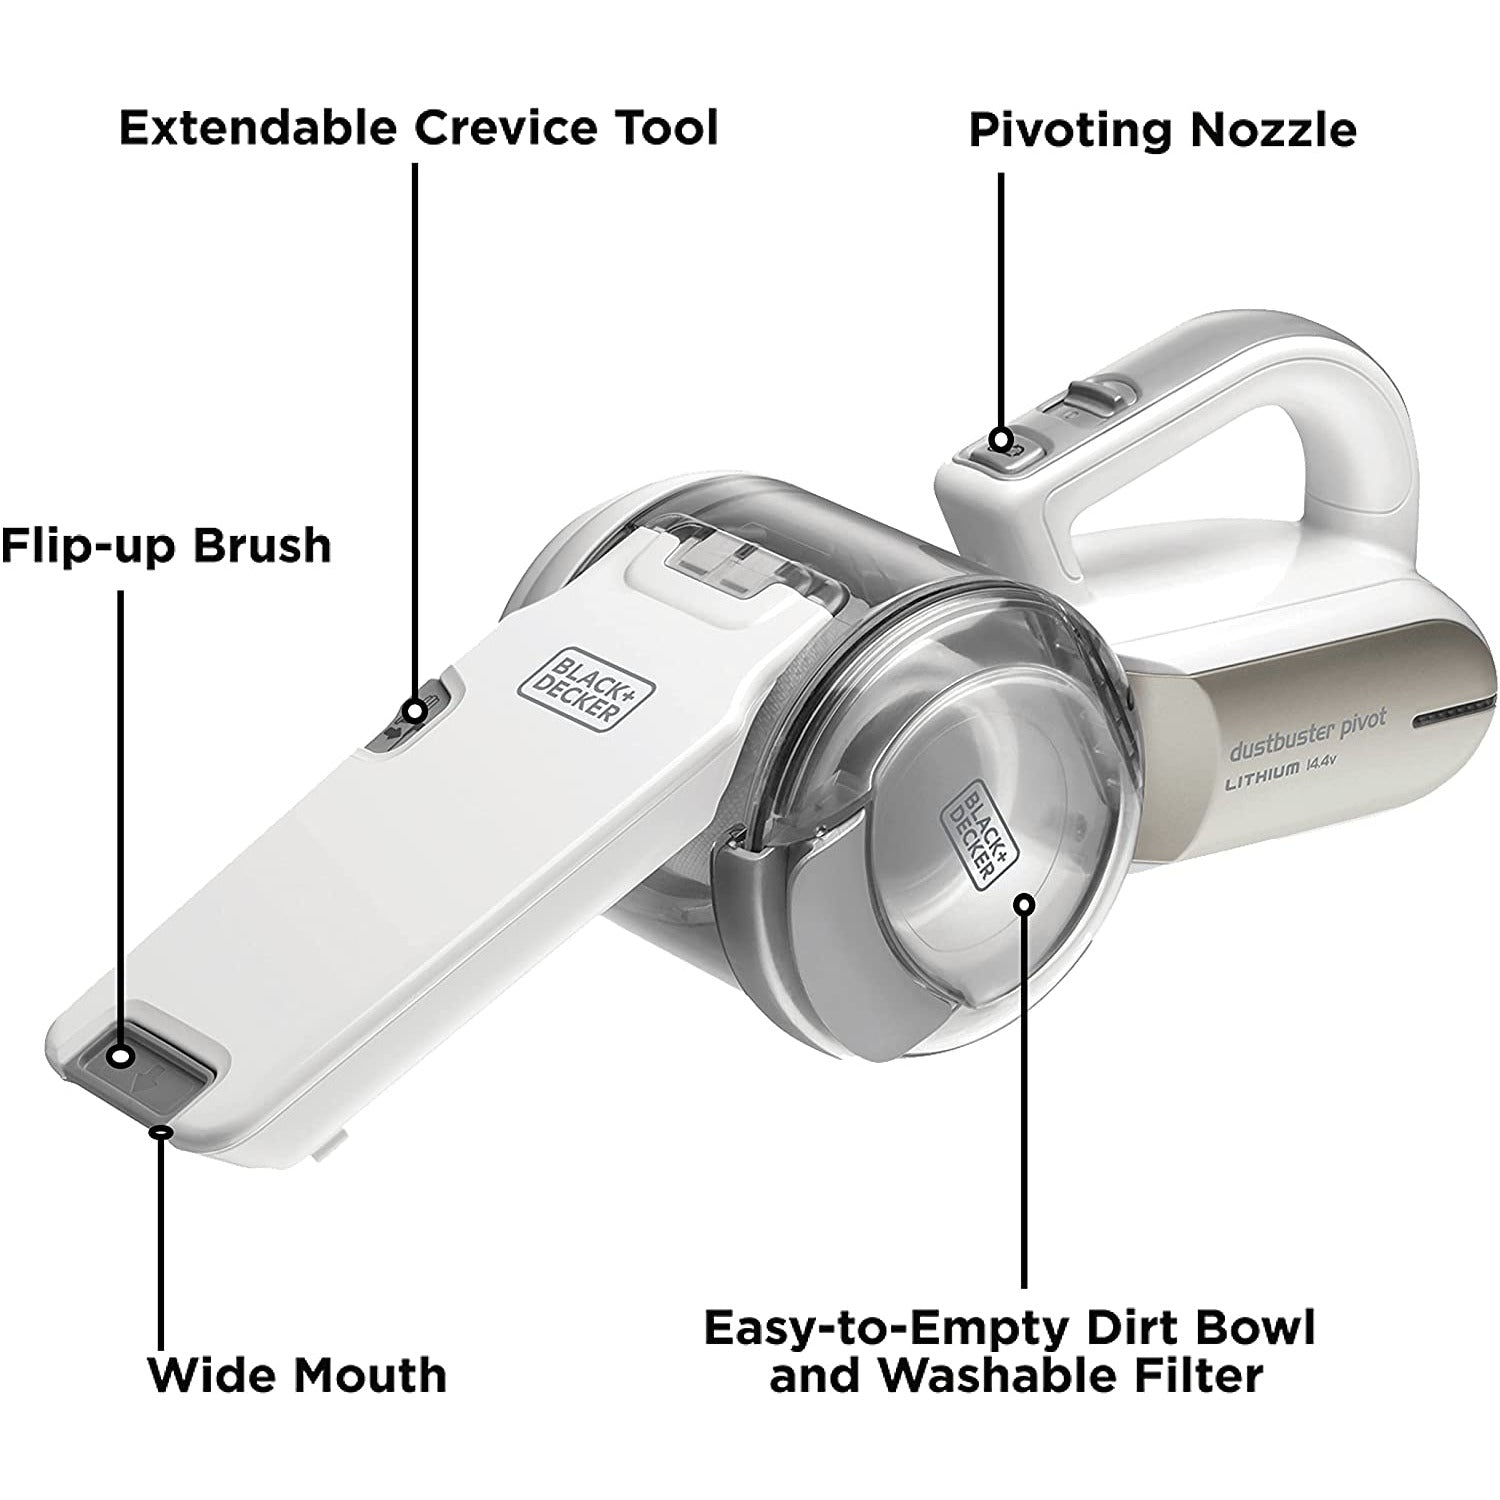 How to Clean the Filter on the Black & Decker Dustbuster Pivot Handheld  Vacuum Cleaner 